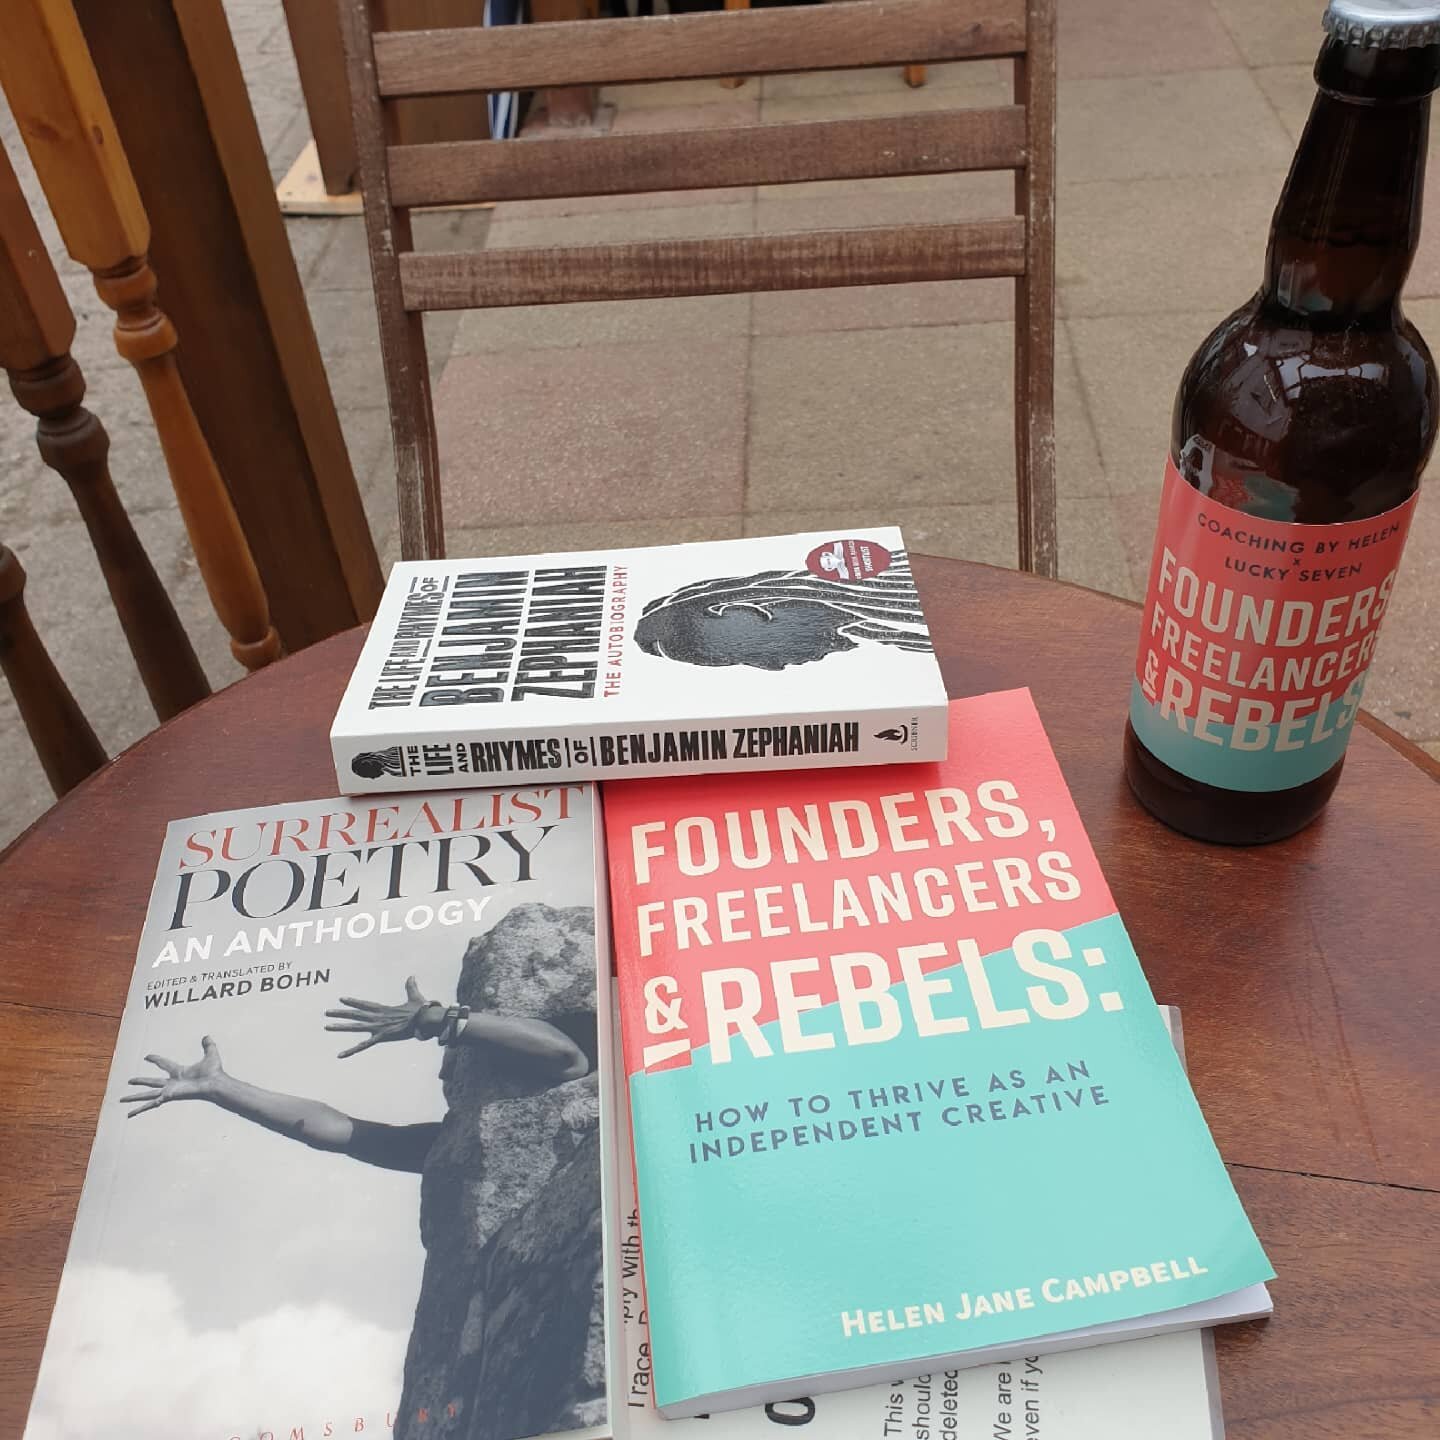 Treasure from a quick trip to the Poetry Bookshop @poetrybookshop  and Old Electric @theoldelectricshop. Found a rather tasty drink @coachingbyhelen hehe